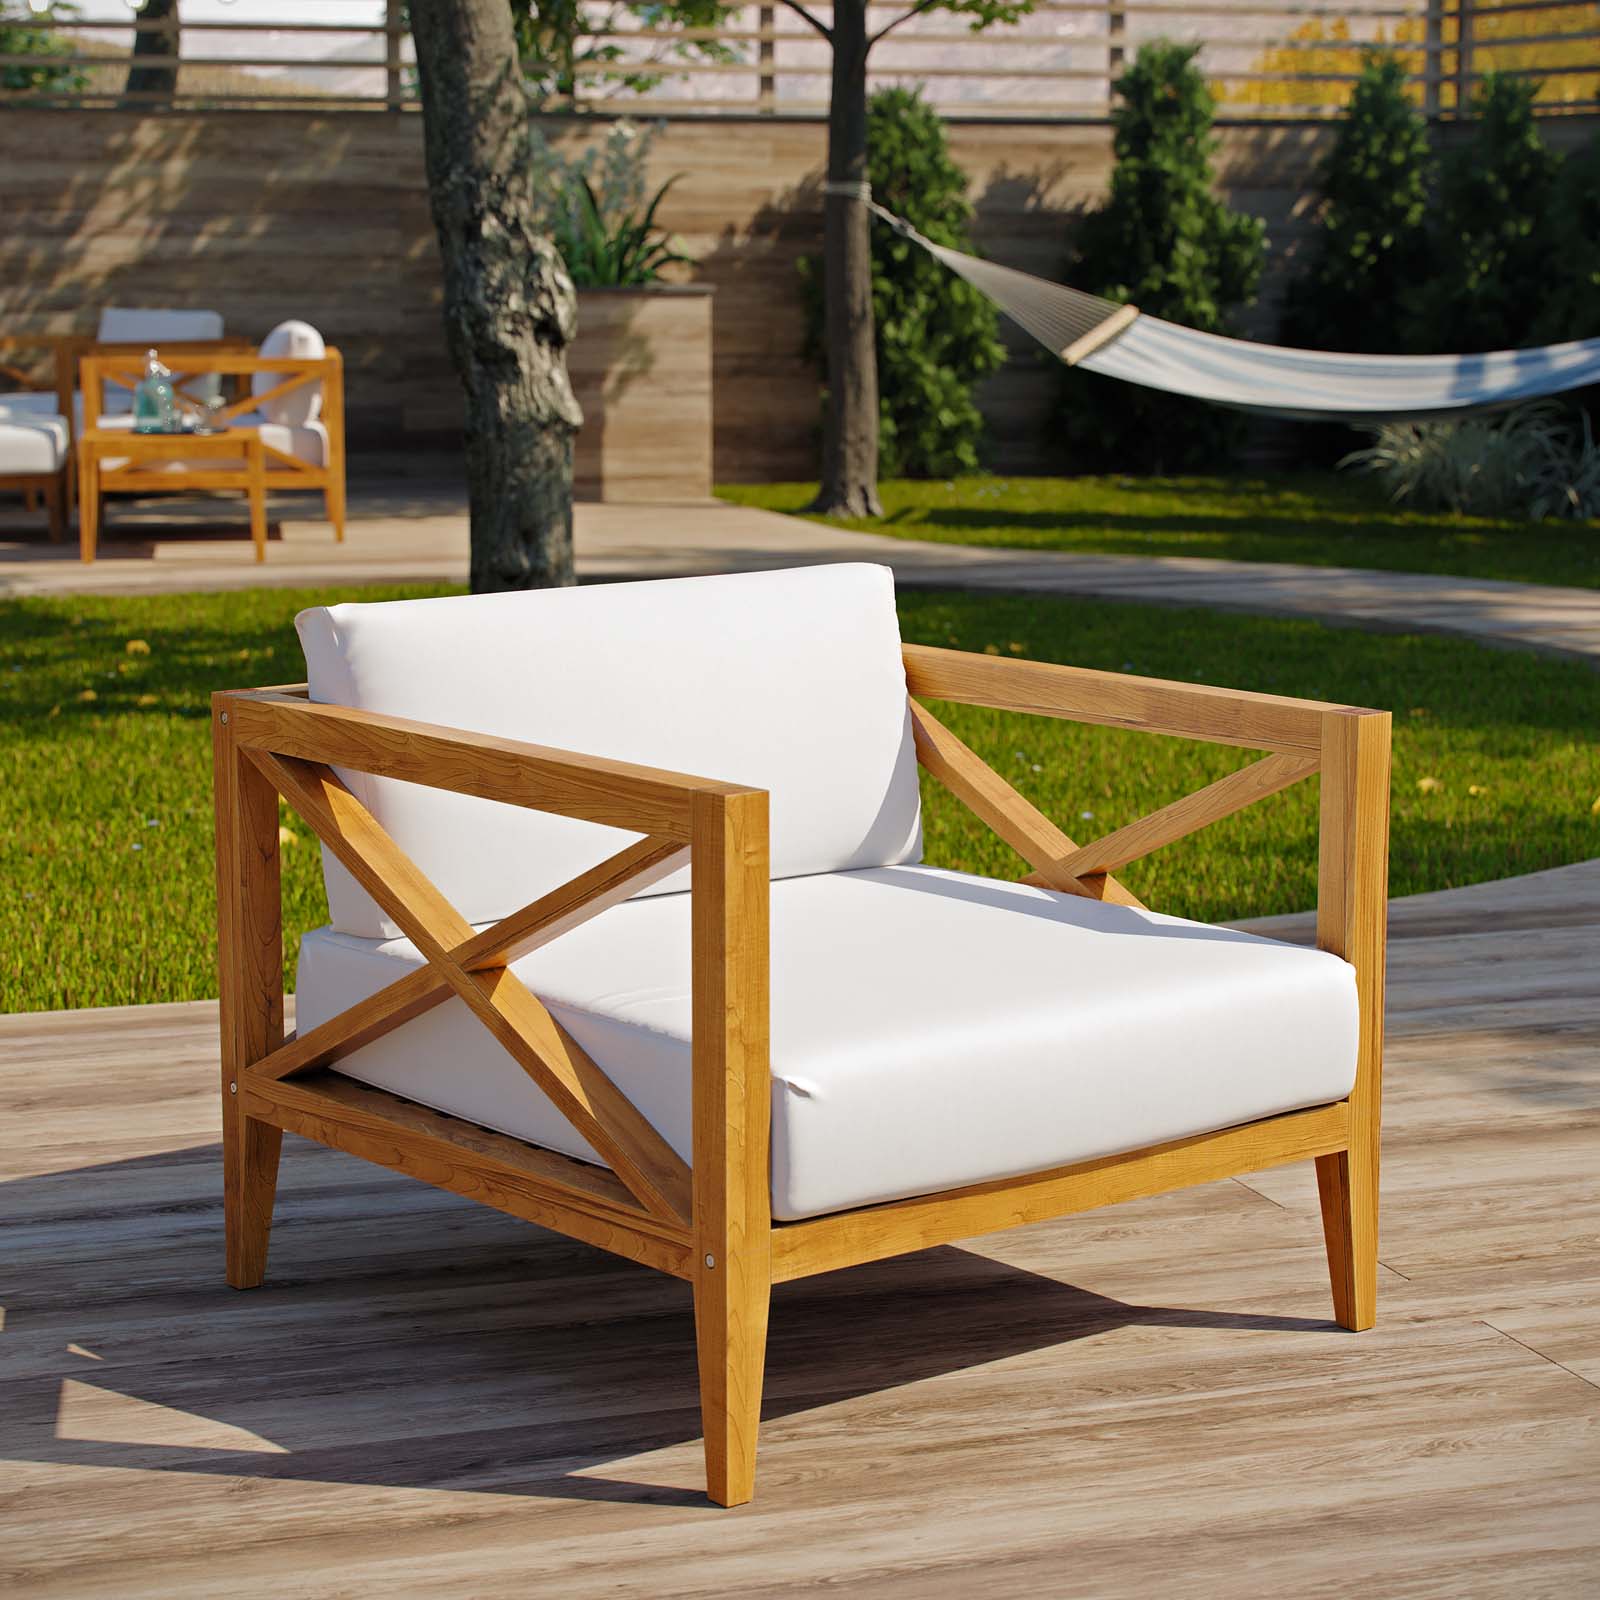 Contemporary Modern Urban Designer Outdoor Patio Balcony Garden Furniture Lounge Side Armchair Chair, Wood, Natural White - image 2 of 7